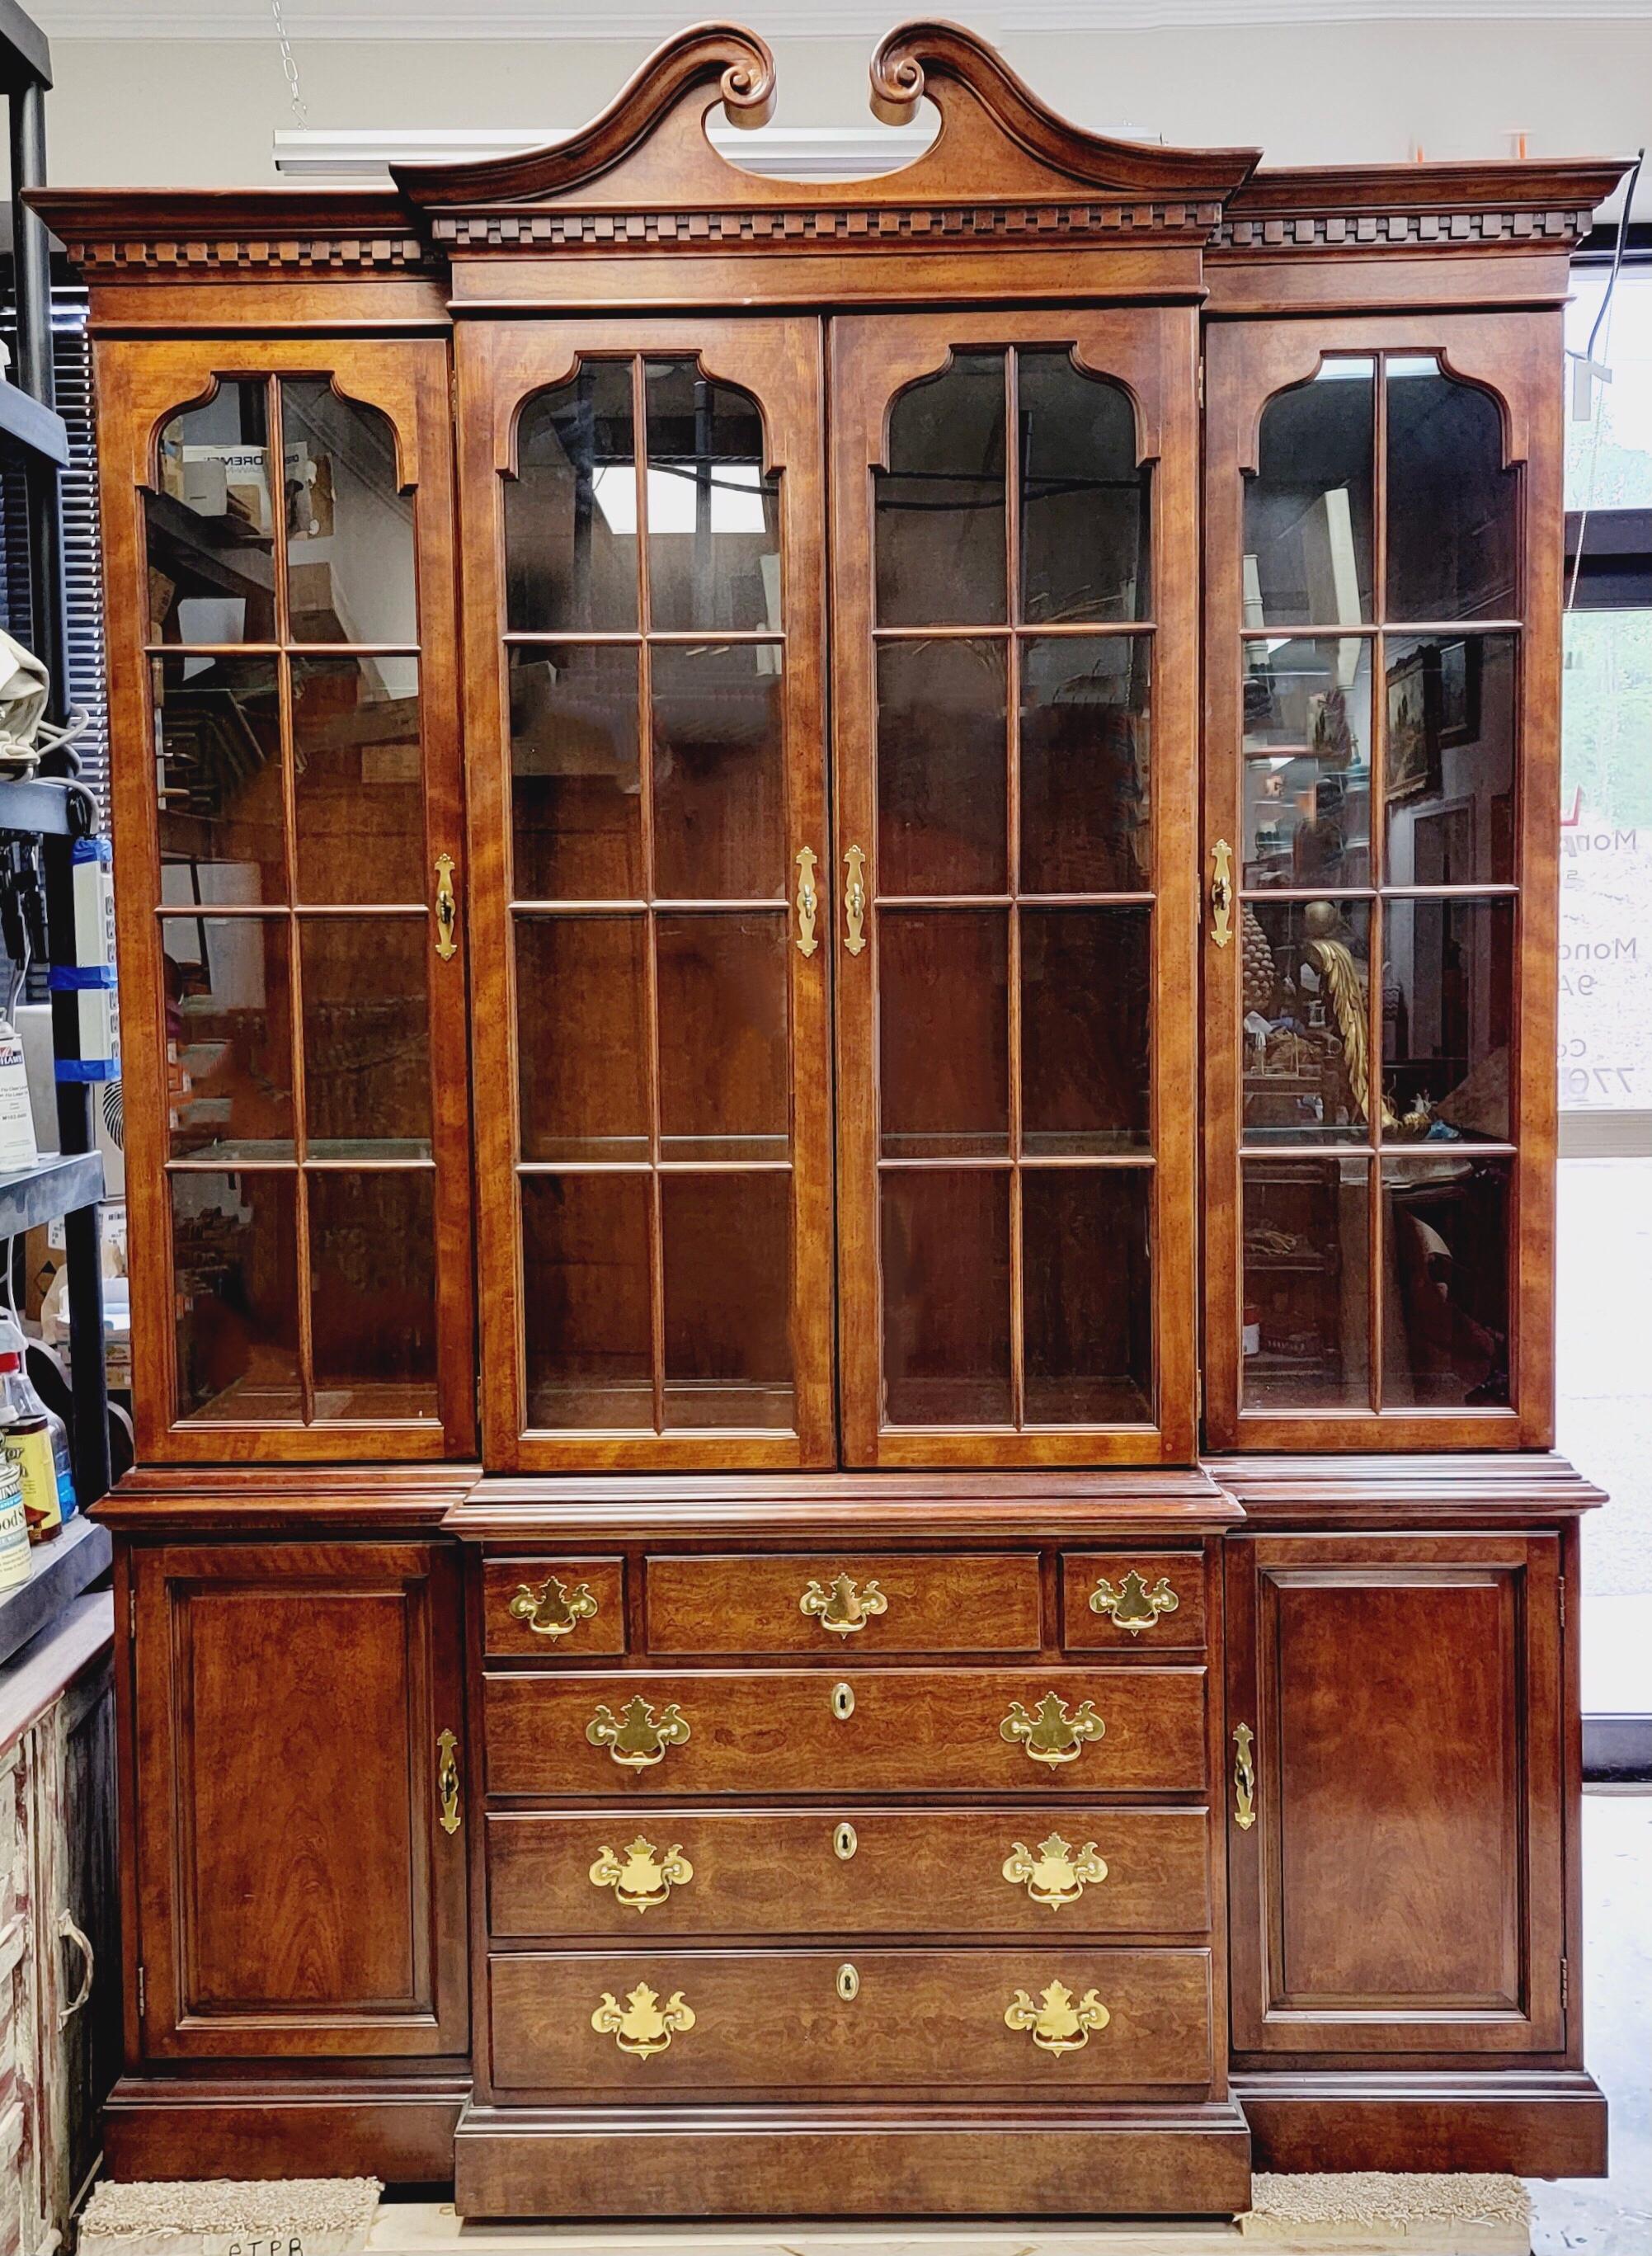 This is a classic Chinese chippendale style carved mahogany cabinet by Henredon. It is a two part cabintet. There are three glass shelves in all three sections of the top. The glass portion has recessed lighting. The bottom, conversely, has wooden